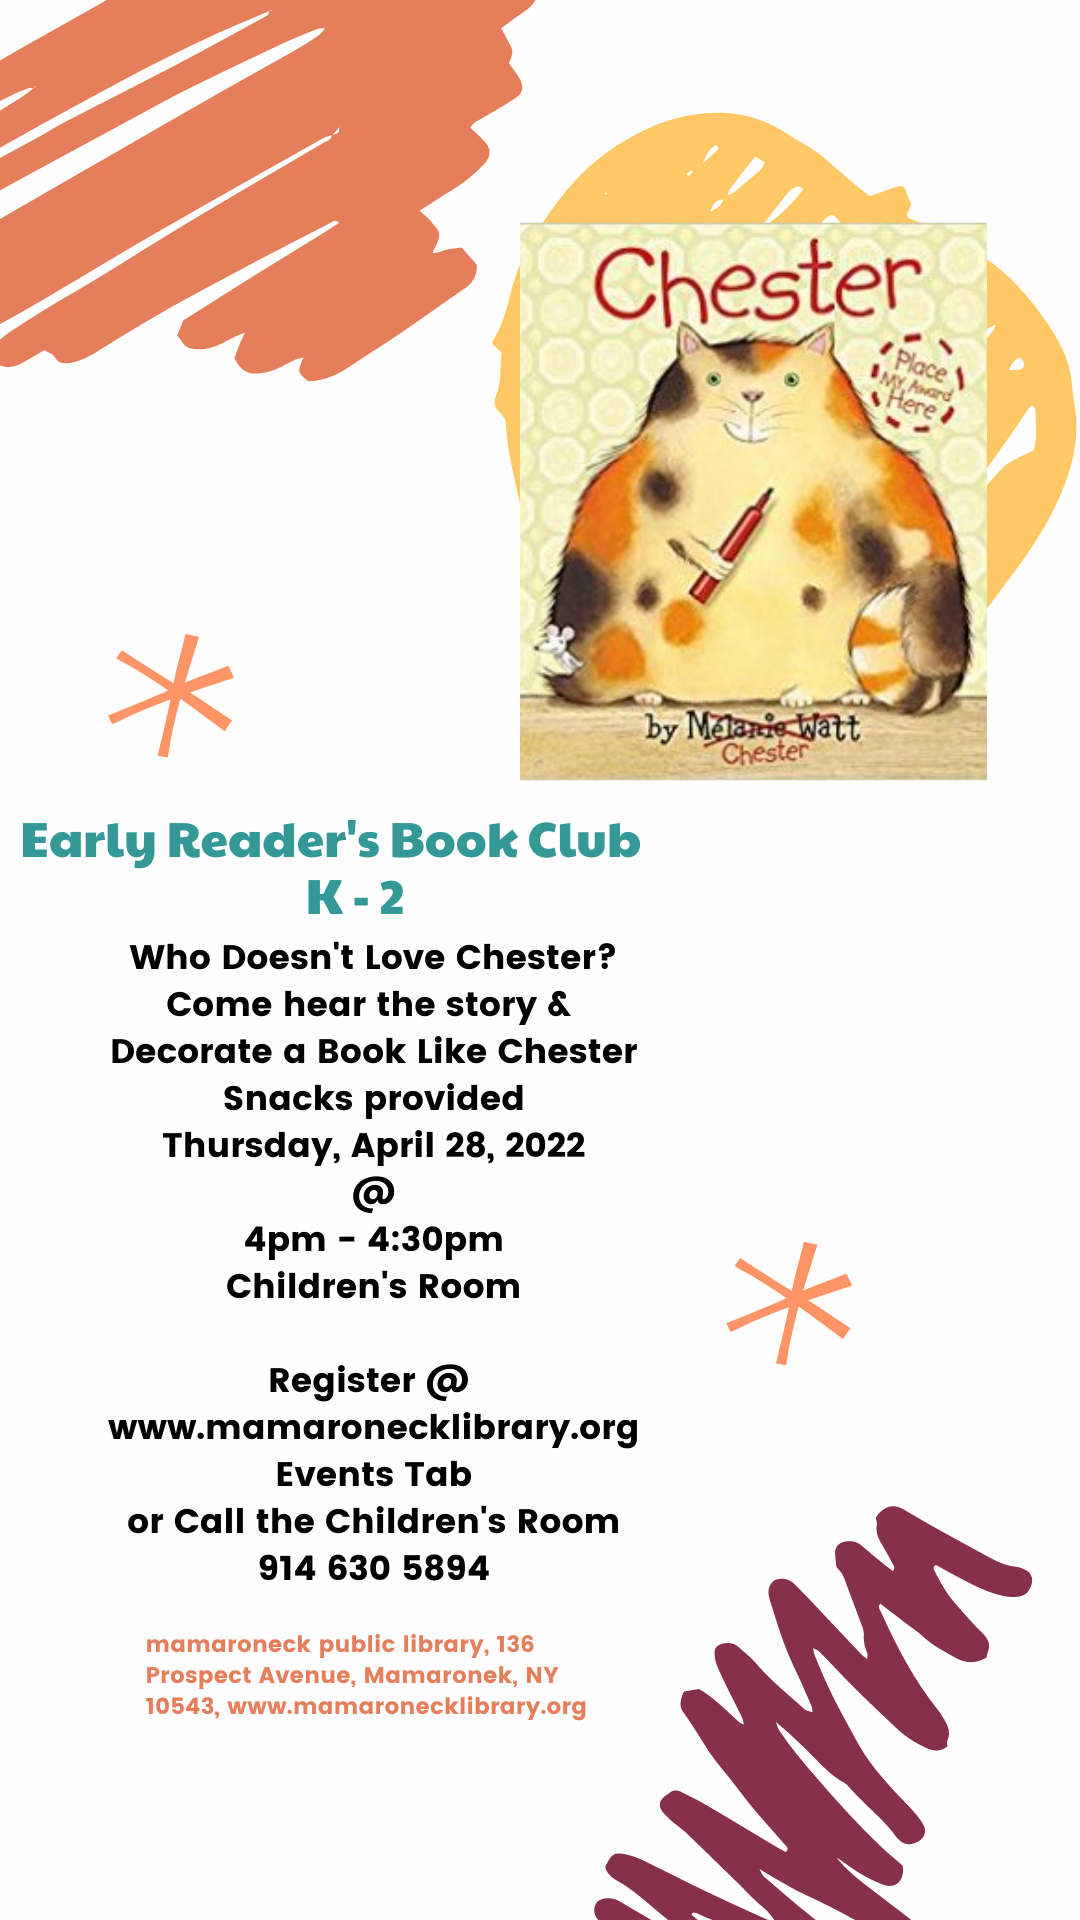 Early Readers Book Club for children